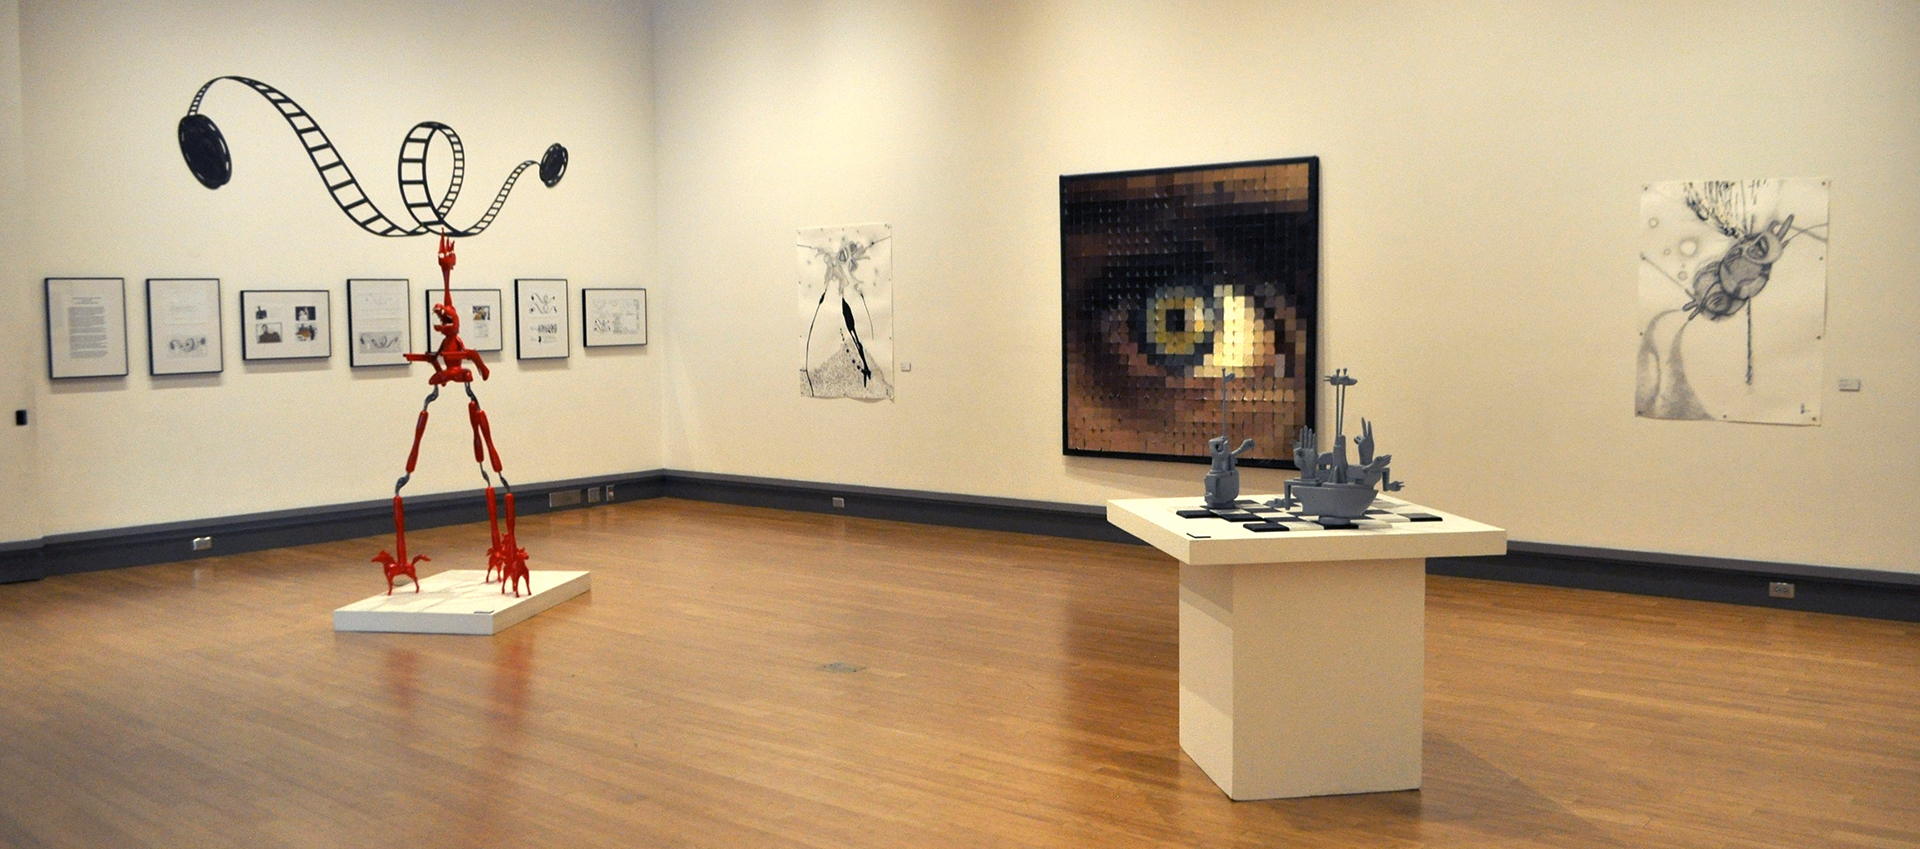 View of McCutchan/Pace gallery, with various art on display: sculpture, 2D